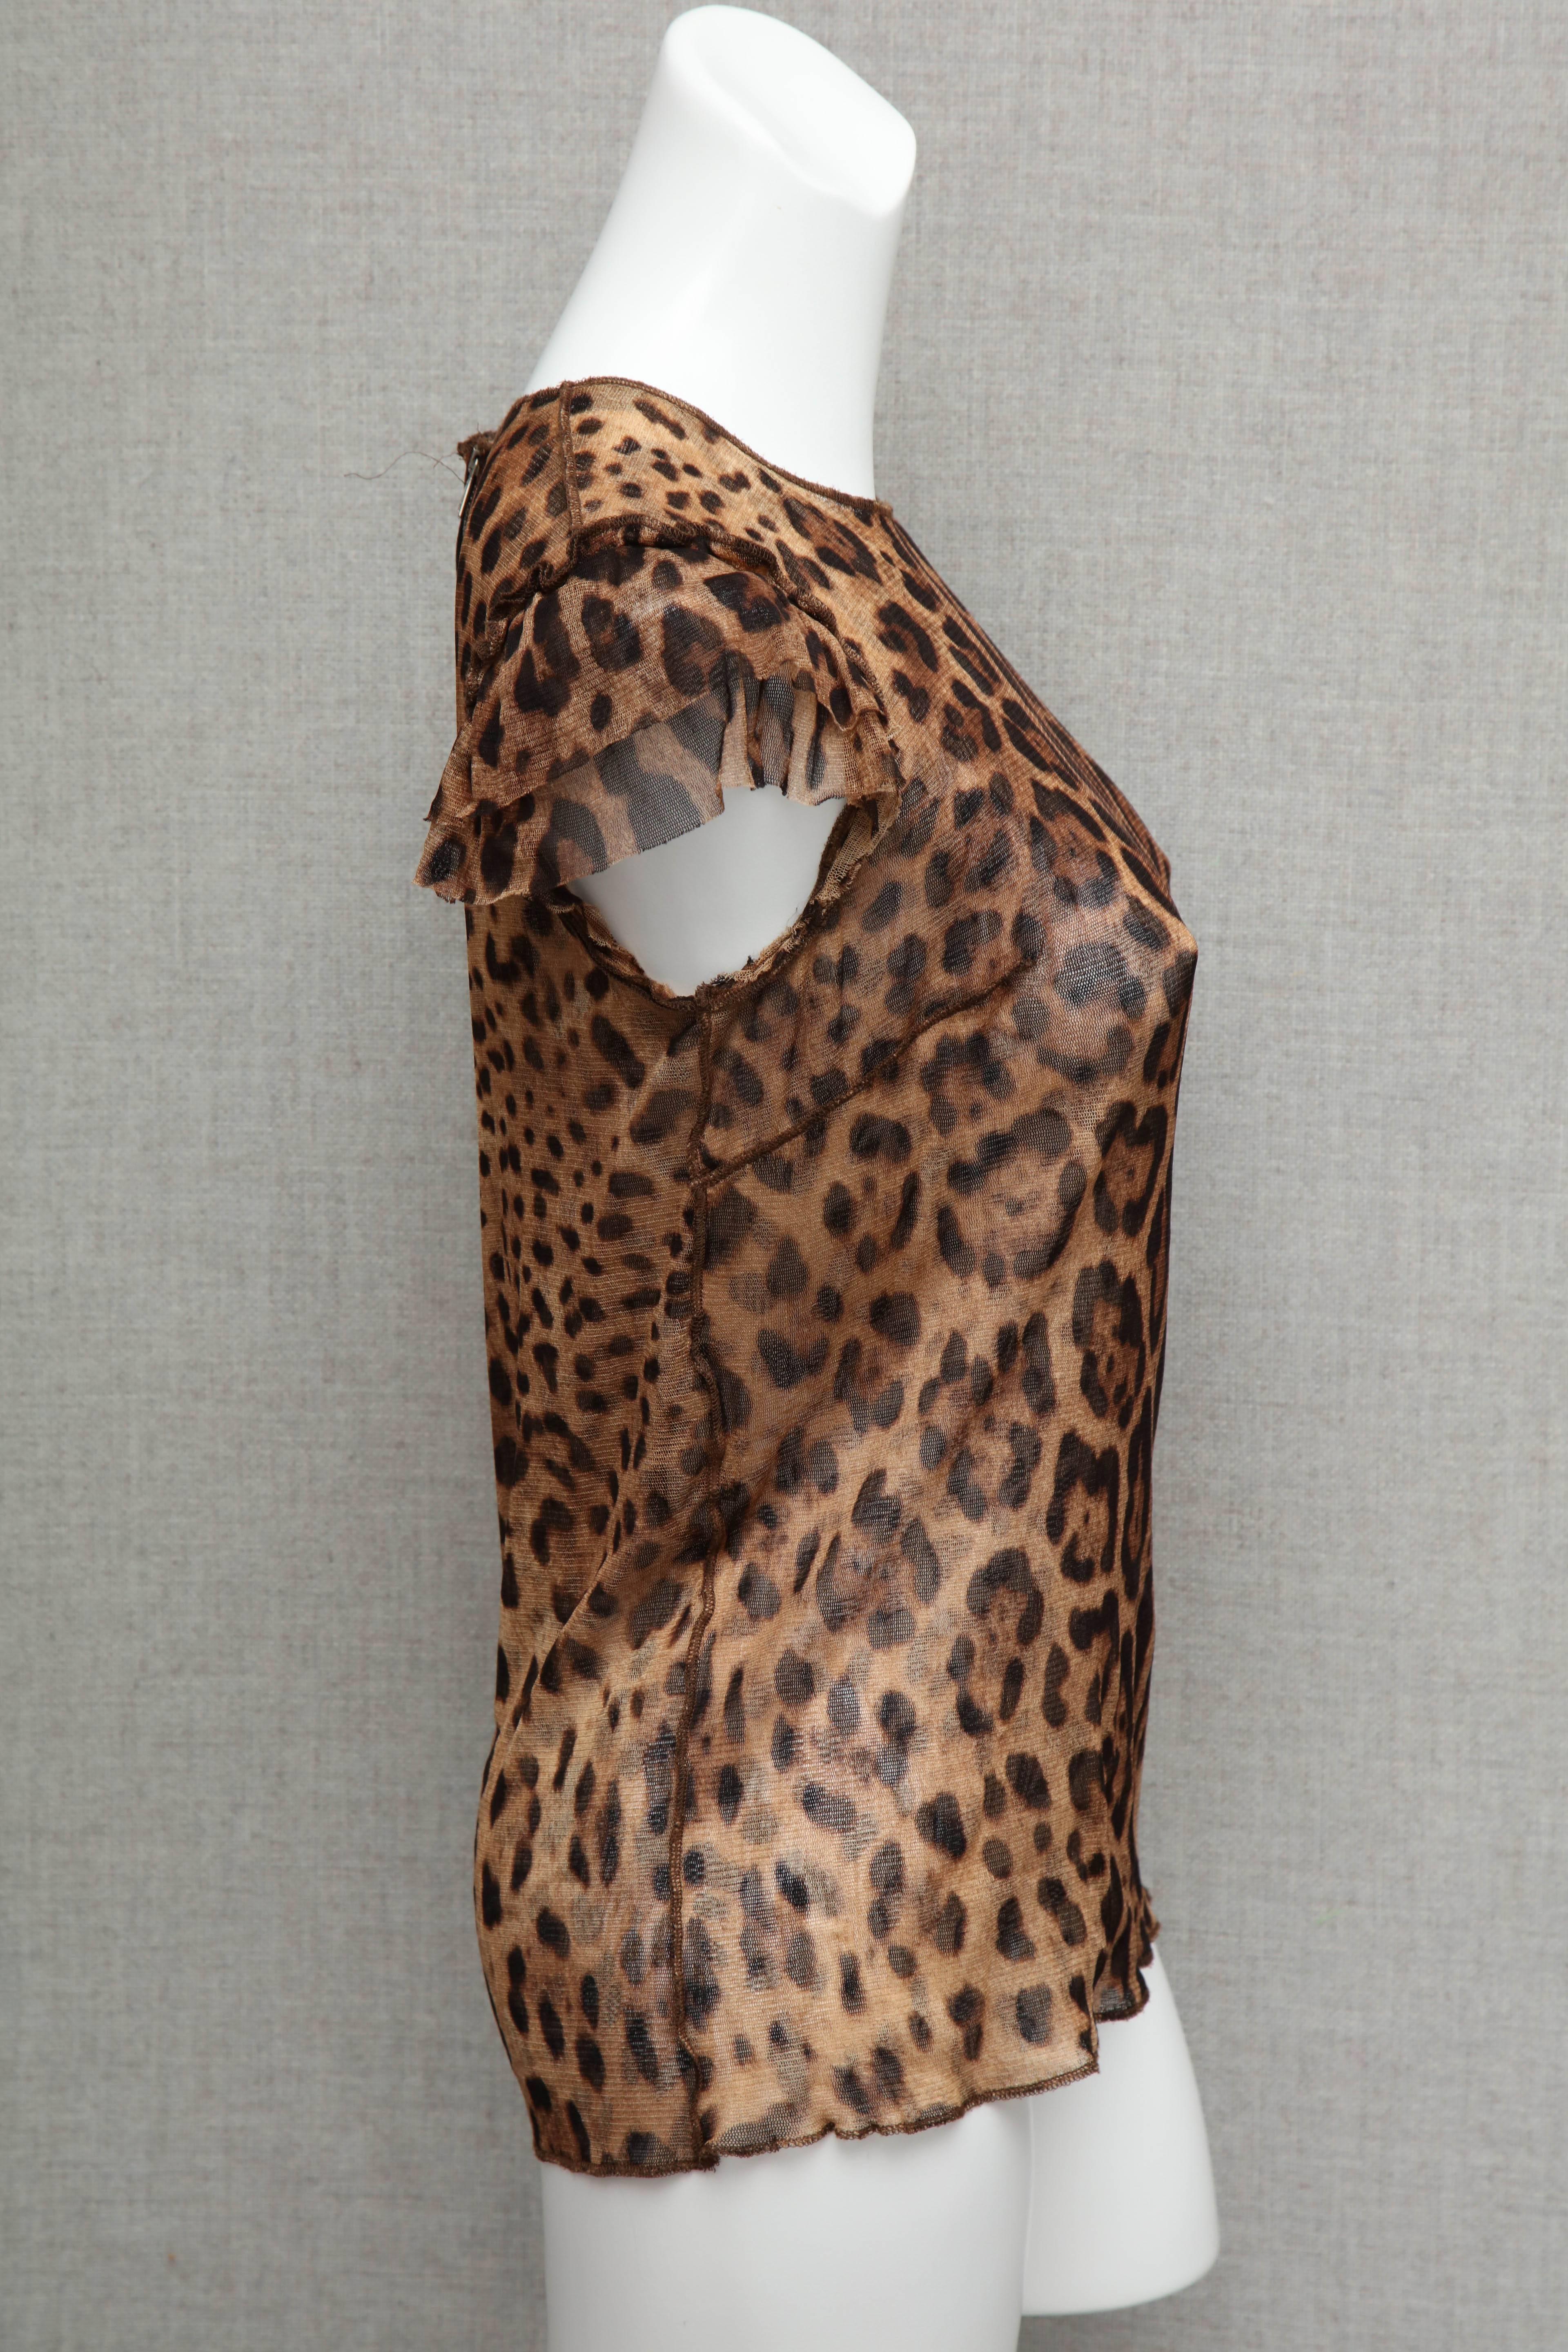 Dolce & Gabbana Leopard Print Top In Excellent Condition In Chicago, IL